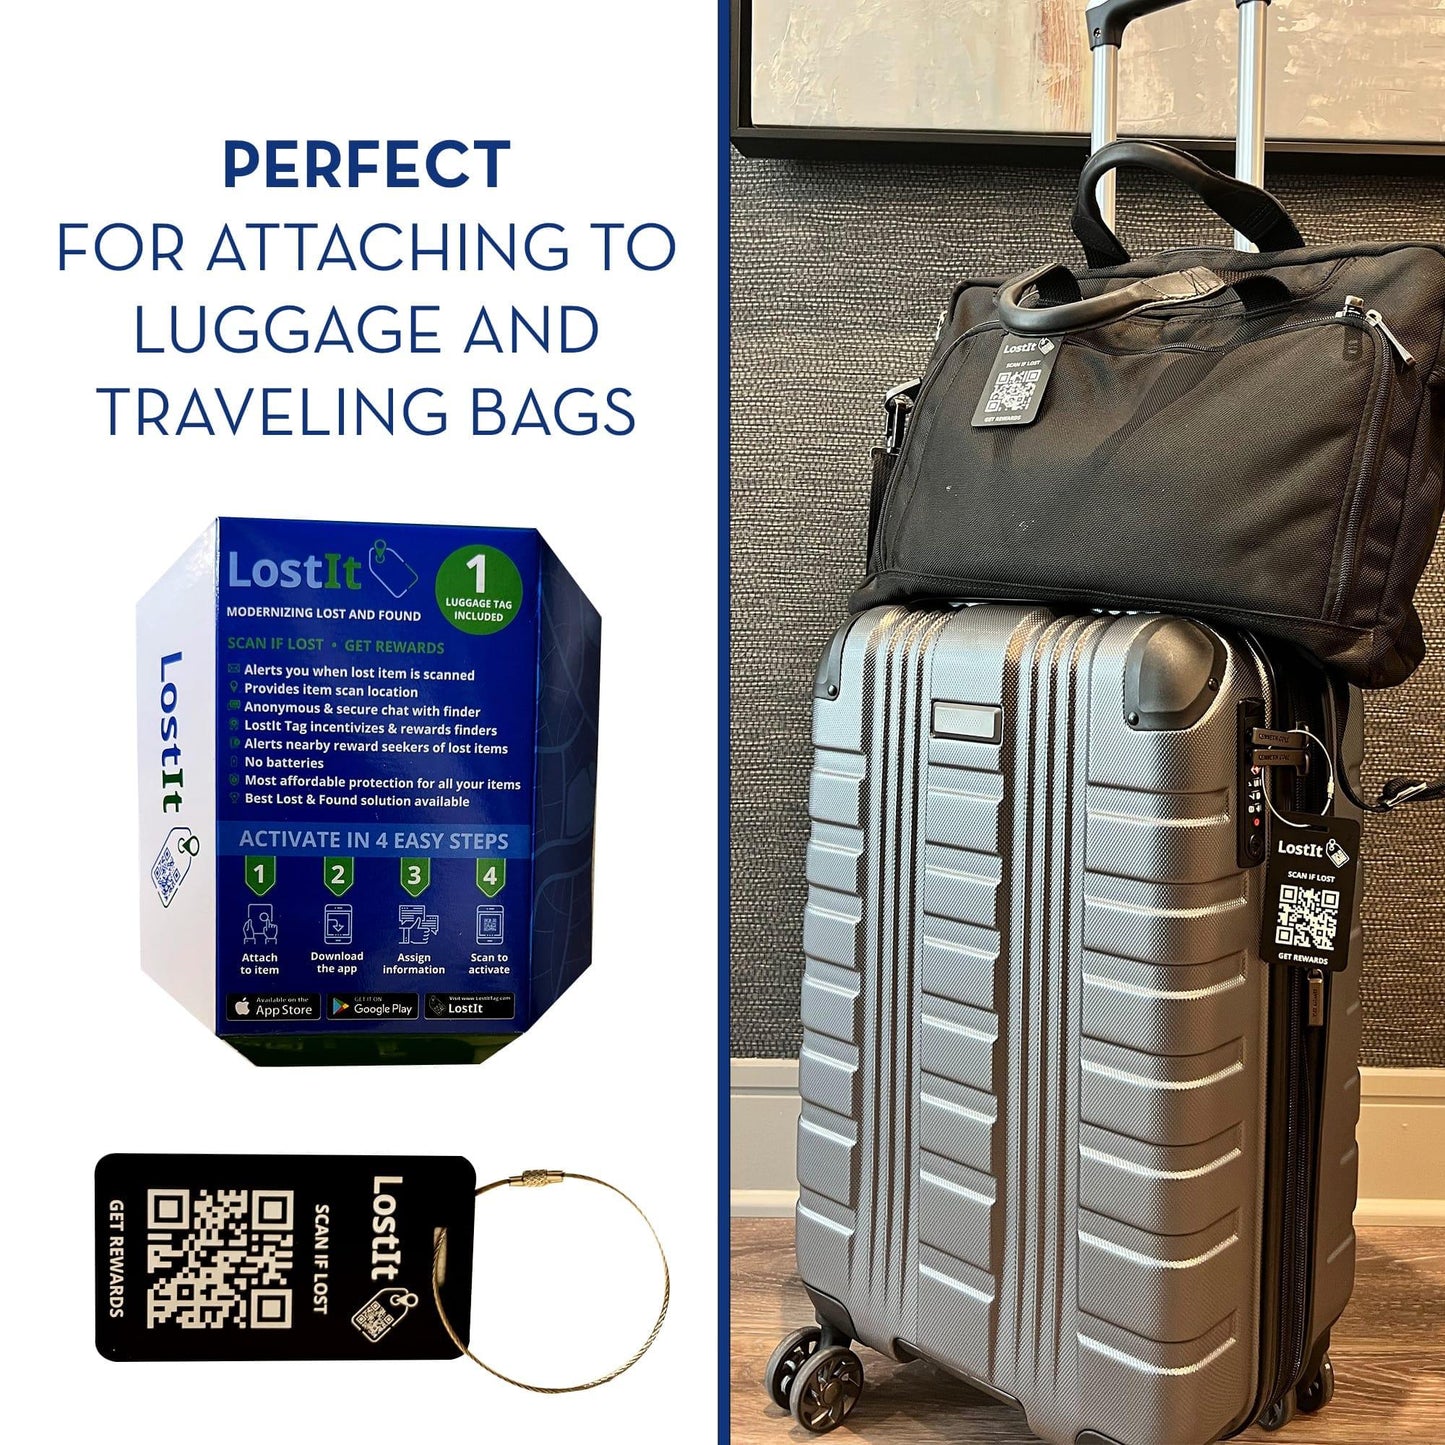 The LostIt Tag travel tag is perfect for attaching to luggage and traveling bags. It can also be used on laptop bags, tools, toolboxes, equipment, hardware, bicycles, and more.